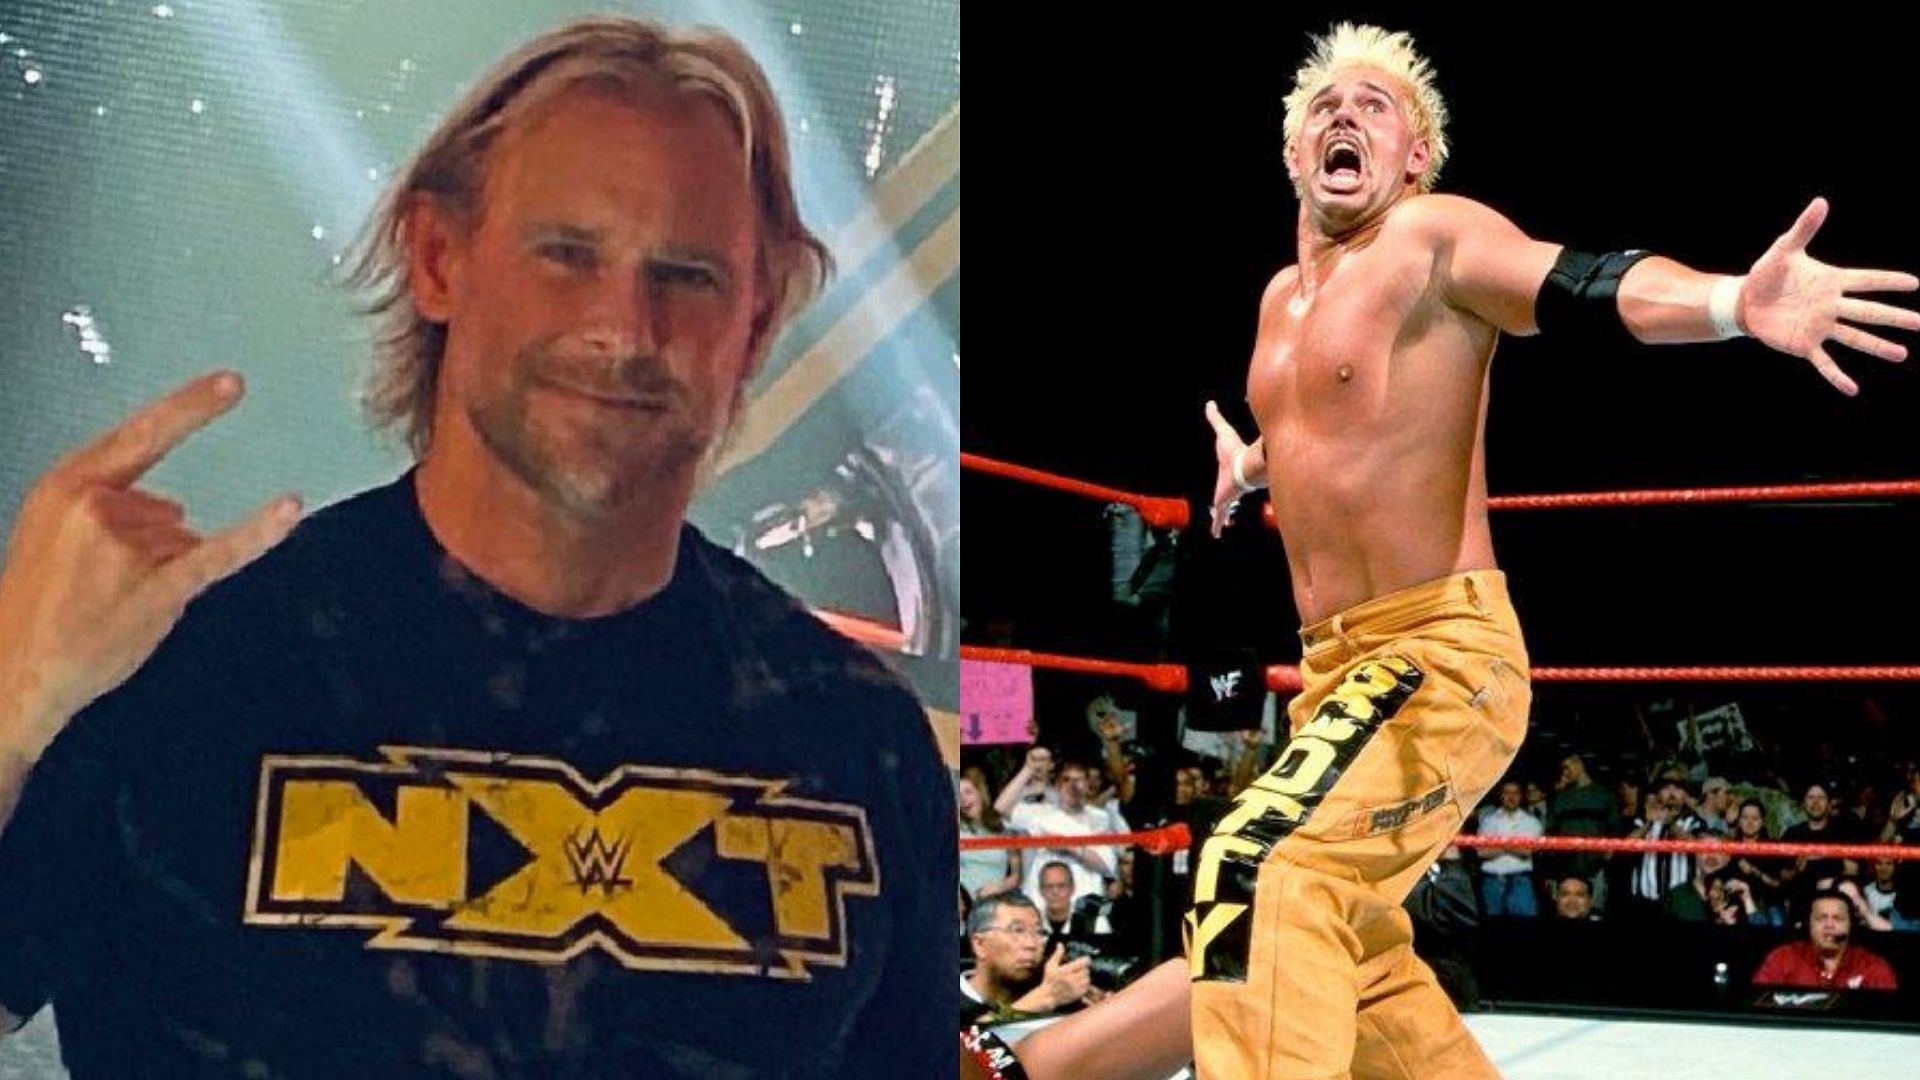 Scotty 2 Hotty recently left WWE after five years as a trainer